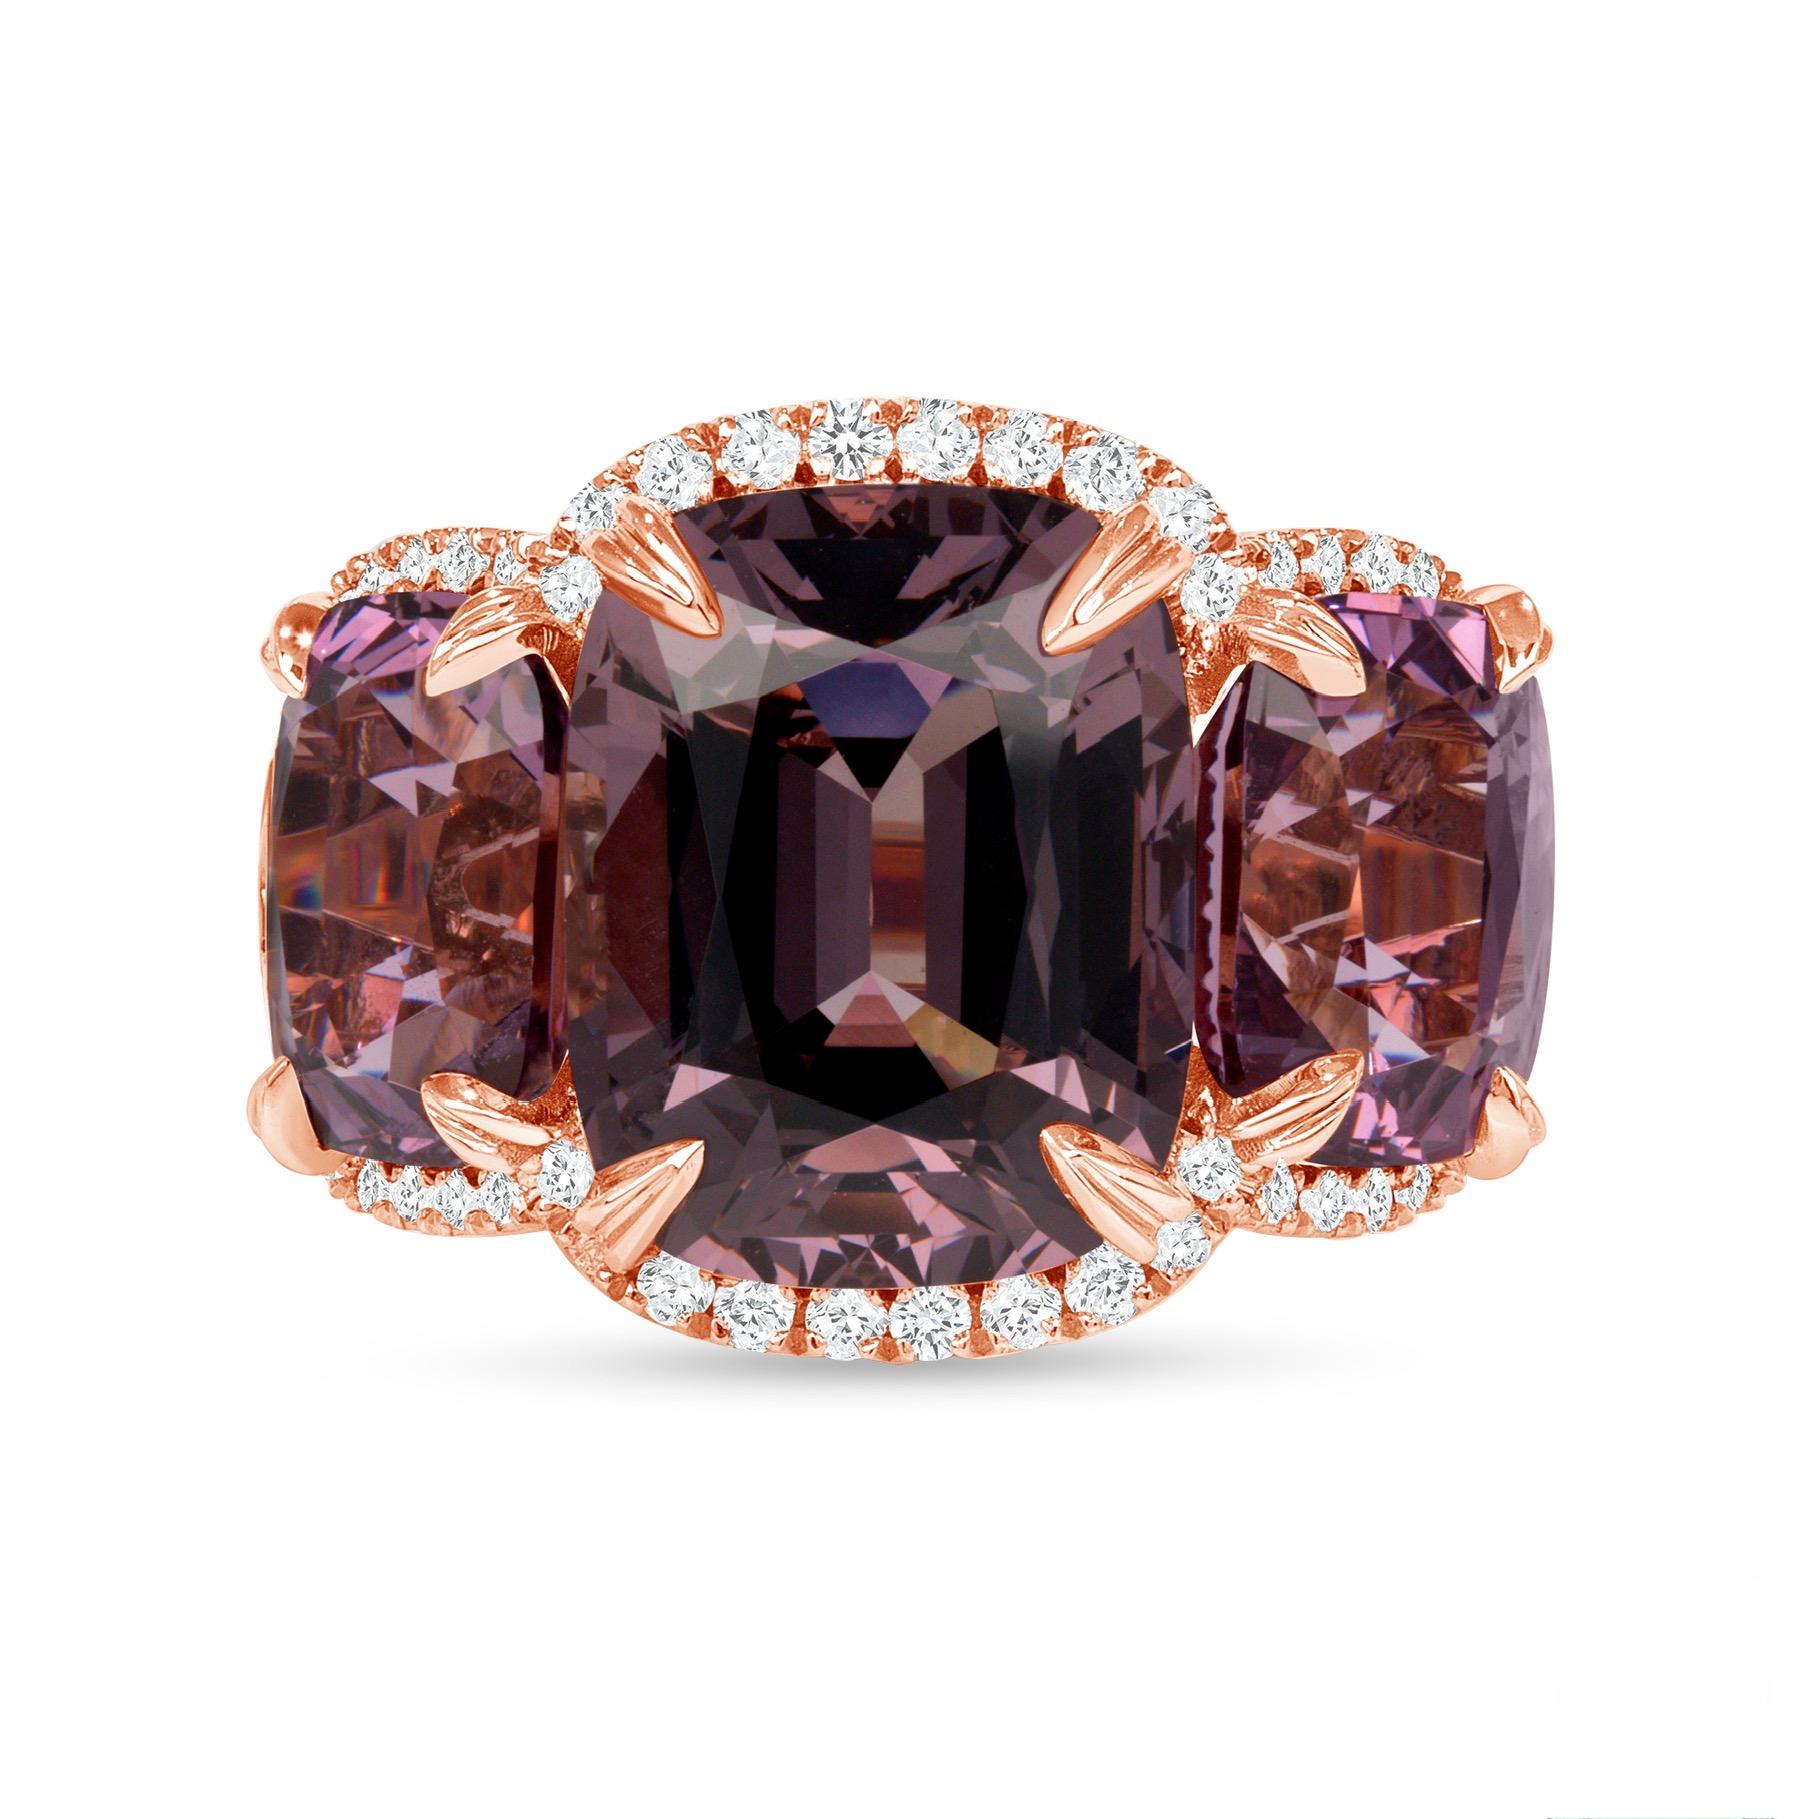 18K rose gold ring, featuring three untreated Burmese Spinels totaling 15.67 carats, accented by two cadillac-cut diamonds totaling 0.35ct and round brilliant-cut diamonds totaling 0.82ct. GIA certified.